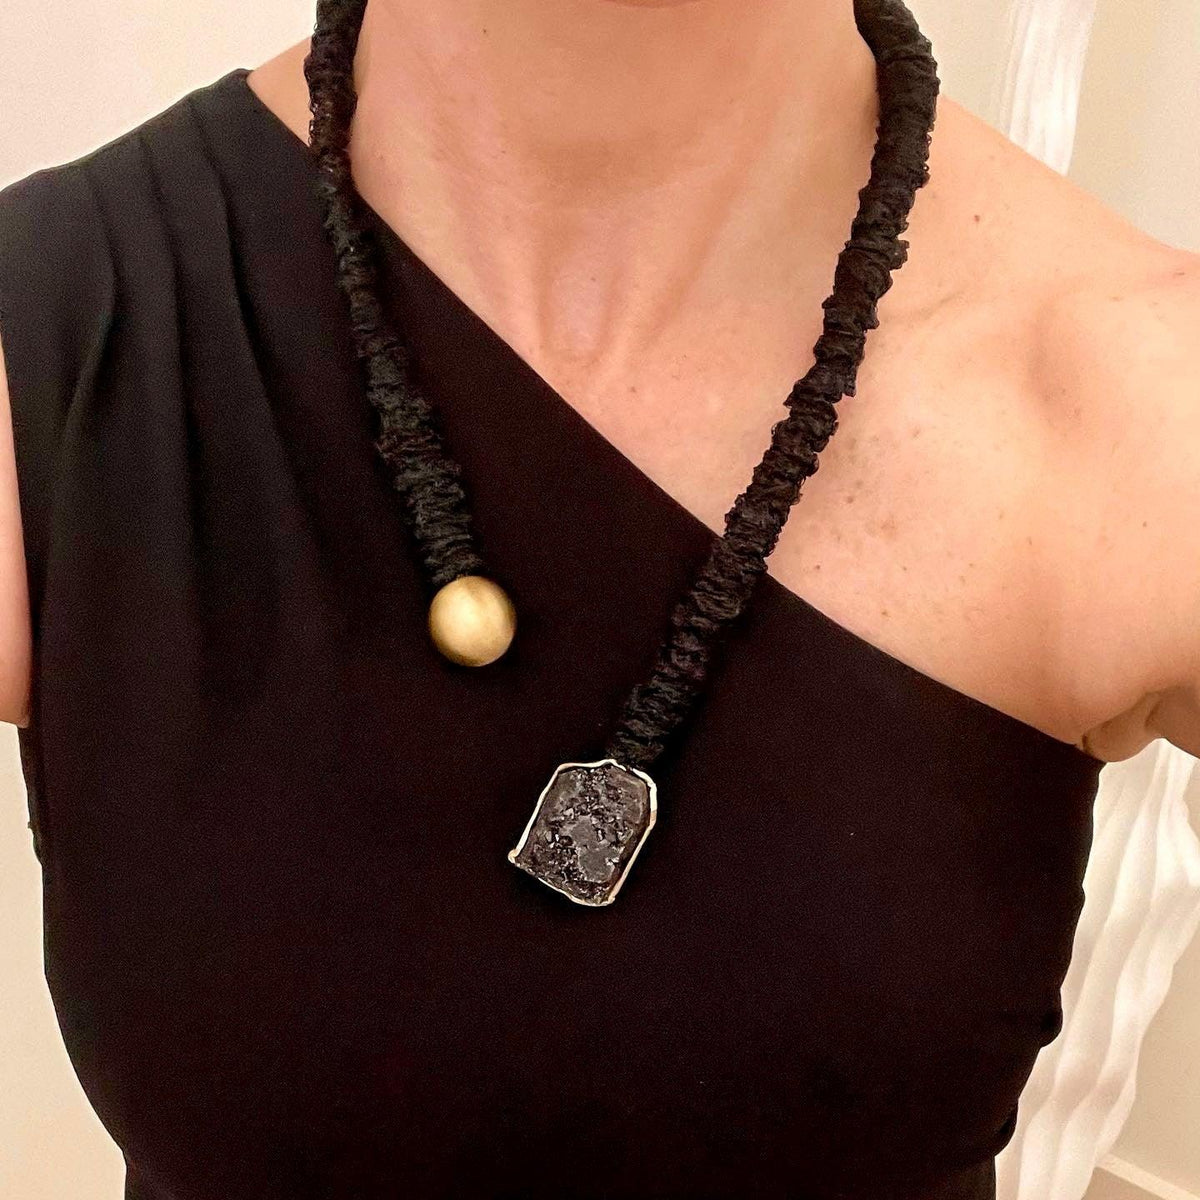 Cosmos Short Necklace with Black Agate Stone - Vita Isola